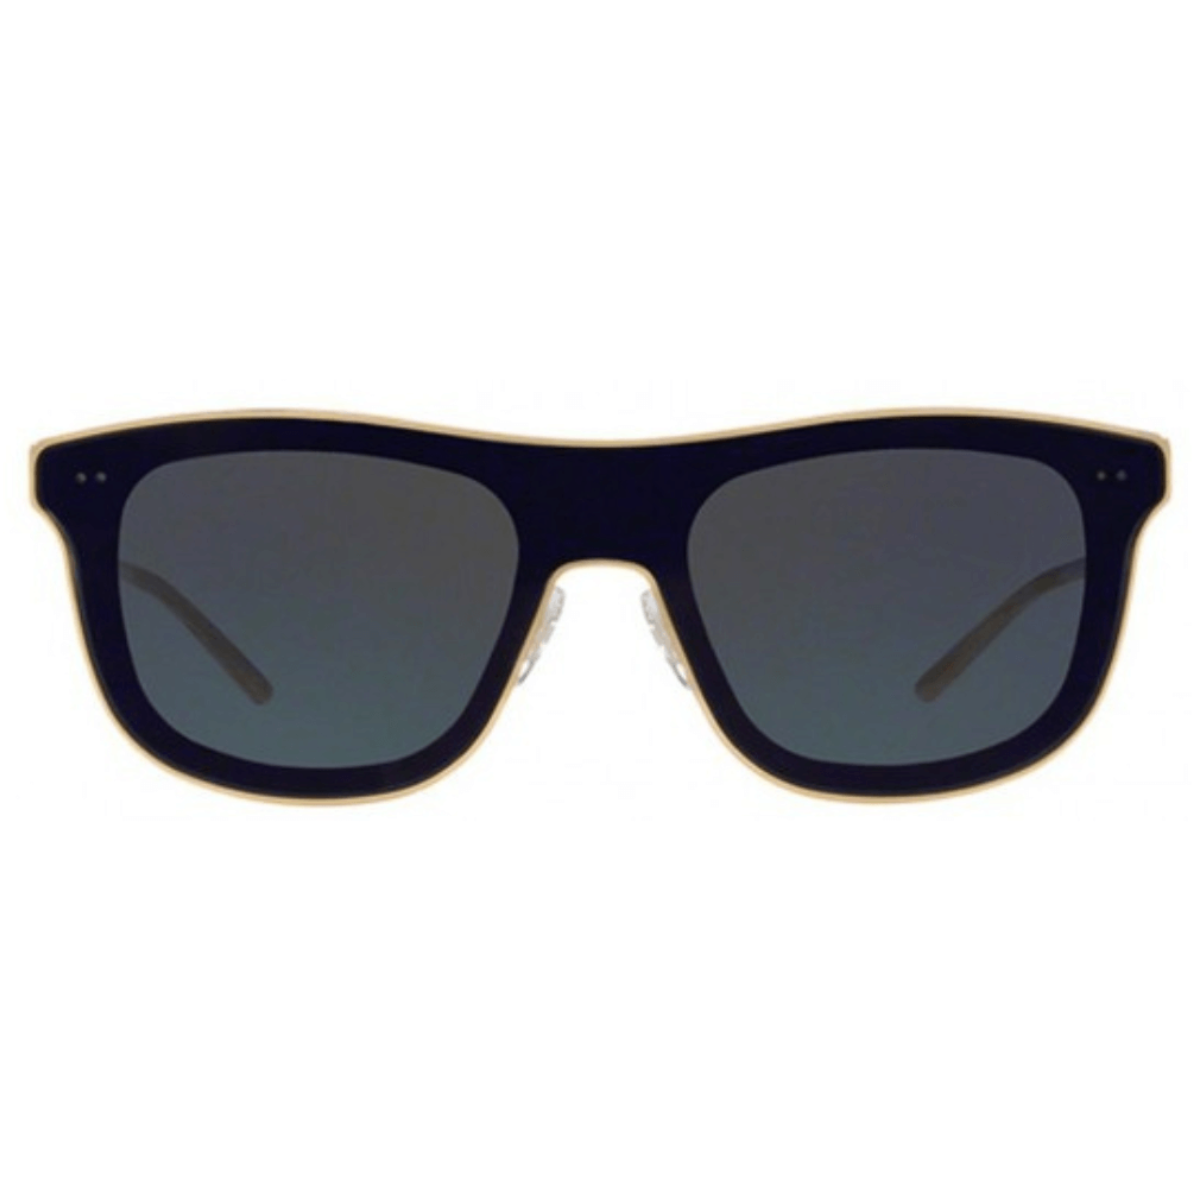 "Elevate your style with Dolce & Gabbana DG2174 02/96 sunglasses in grey and gold from Optorium, featuring a unisex square shape for a sleek look."